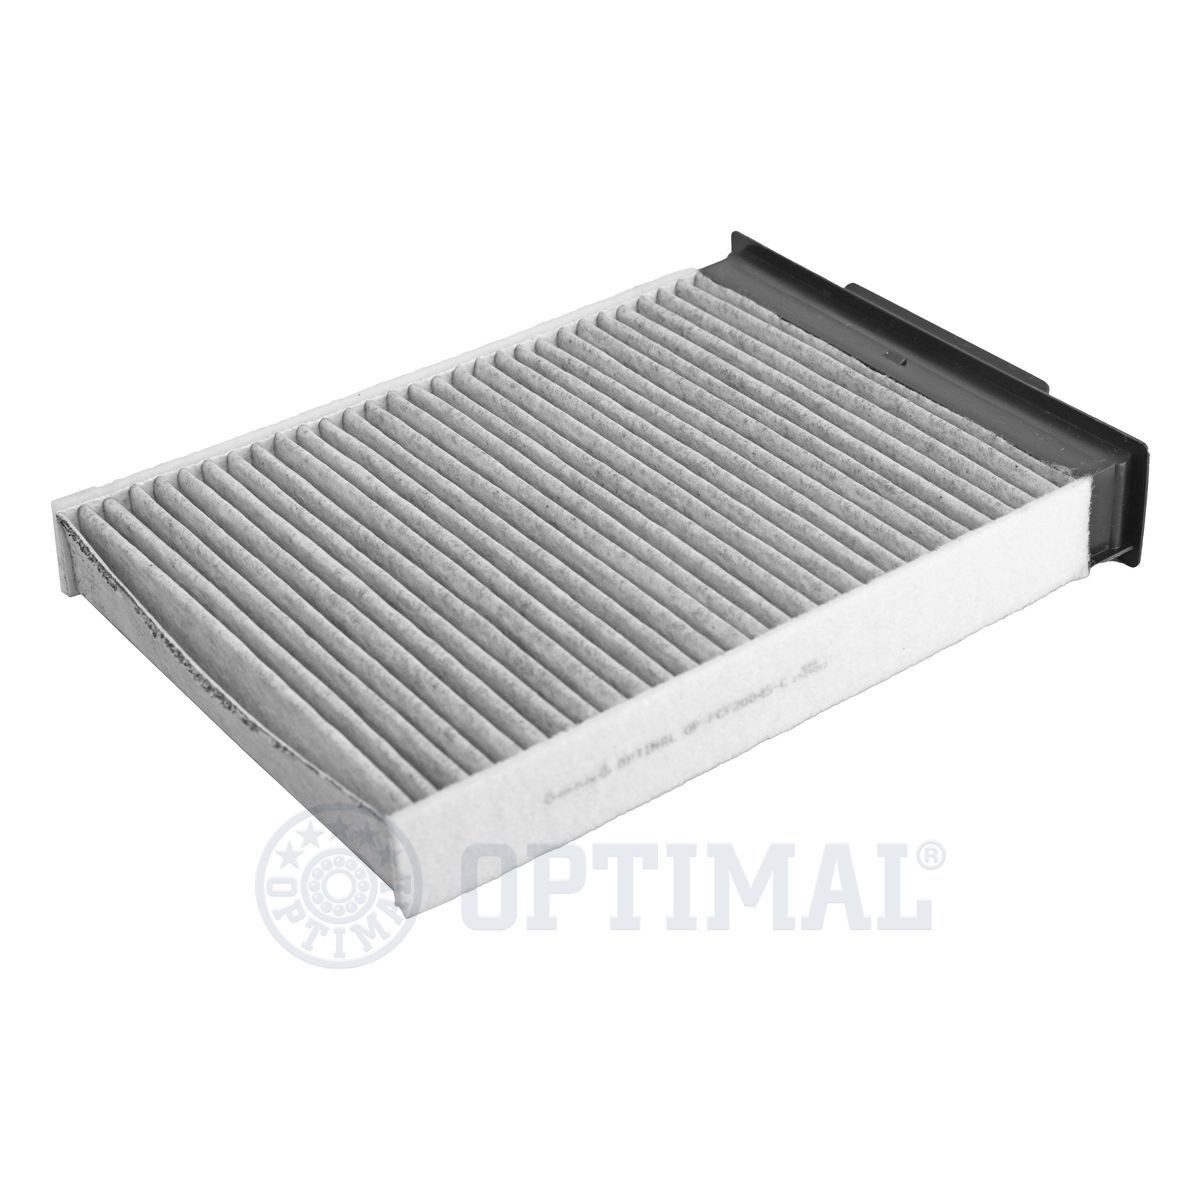 OPTIMAL Activated Carbon Filter, 257 mm x 186 mm x 43 mm Width: 186mm, Height: 43mm, Length: 257mm Cabin filter OP-FCF20045-C buy